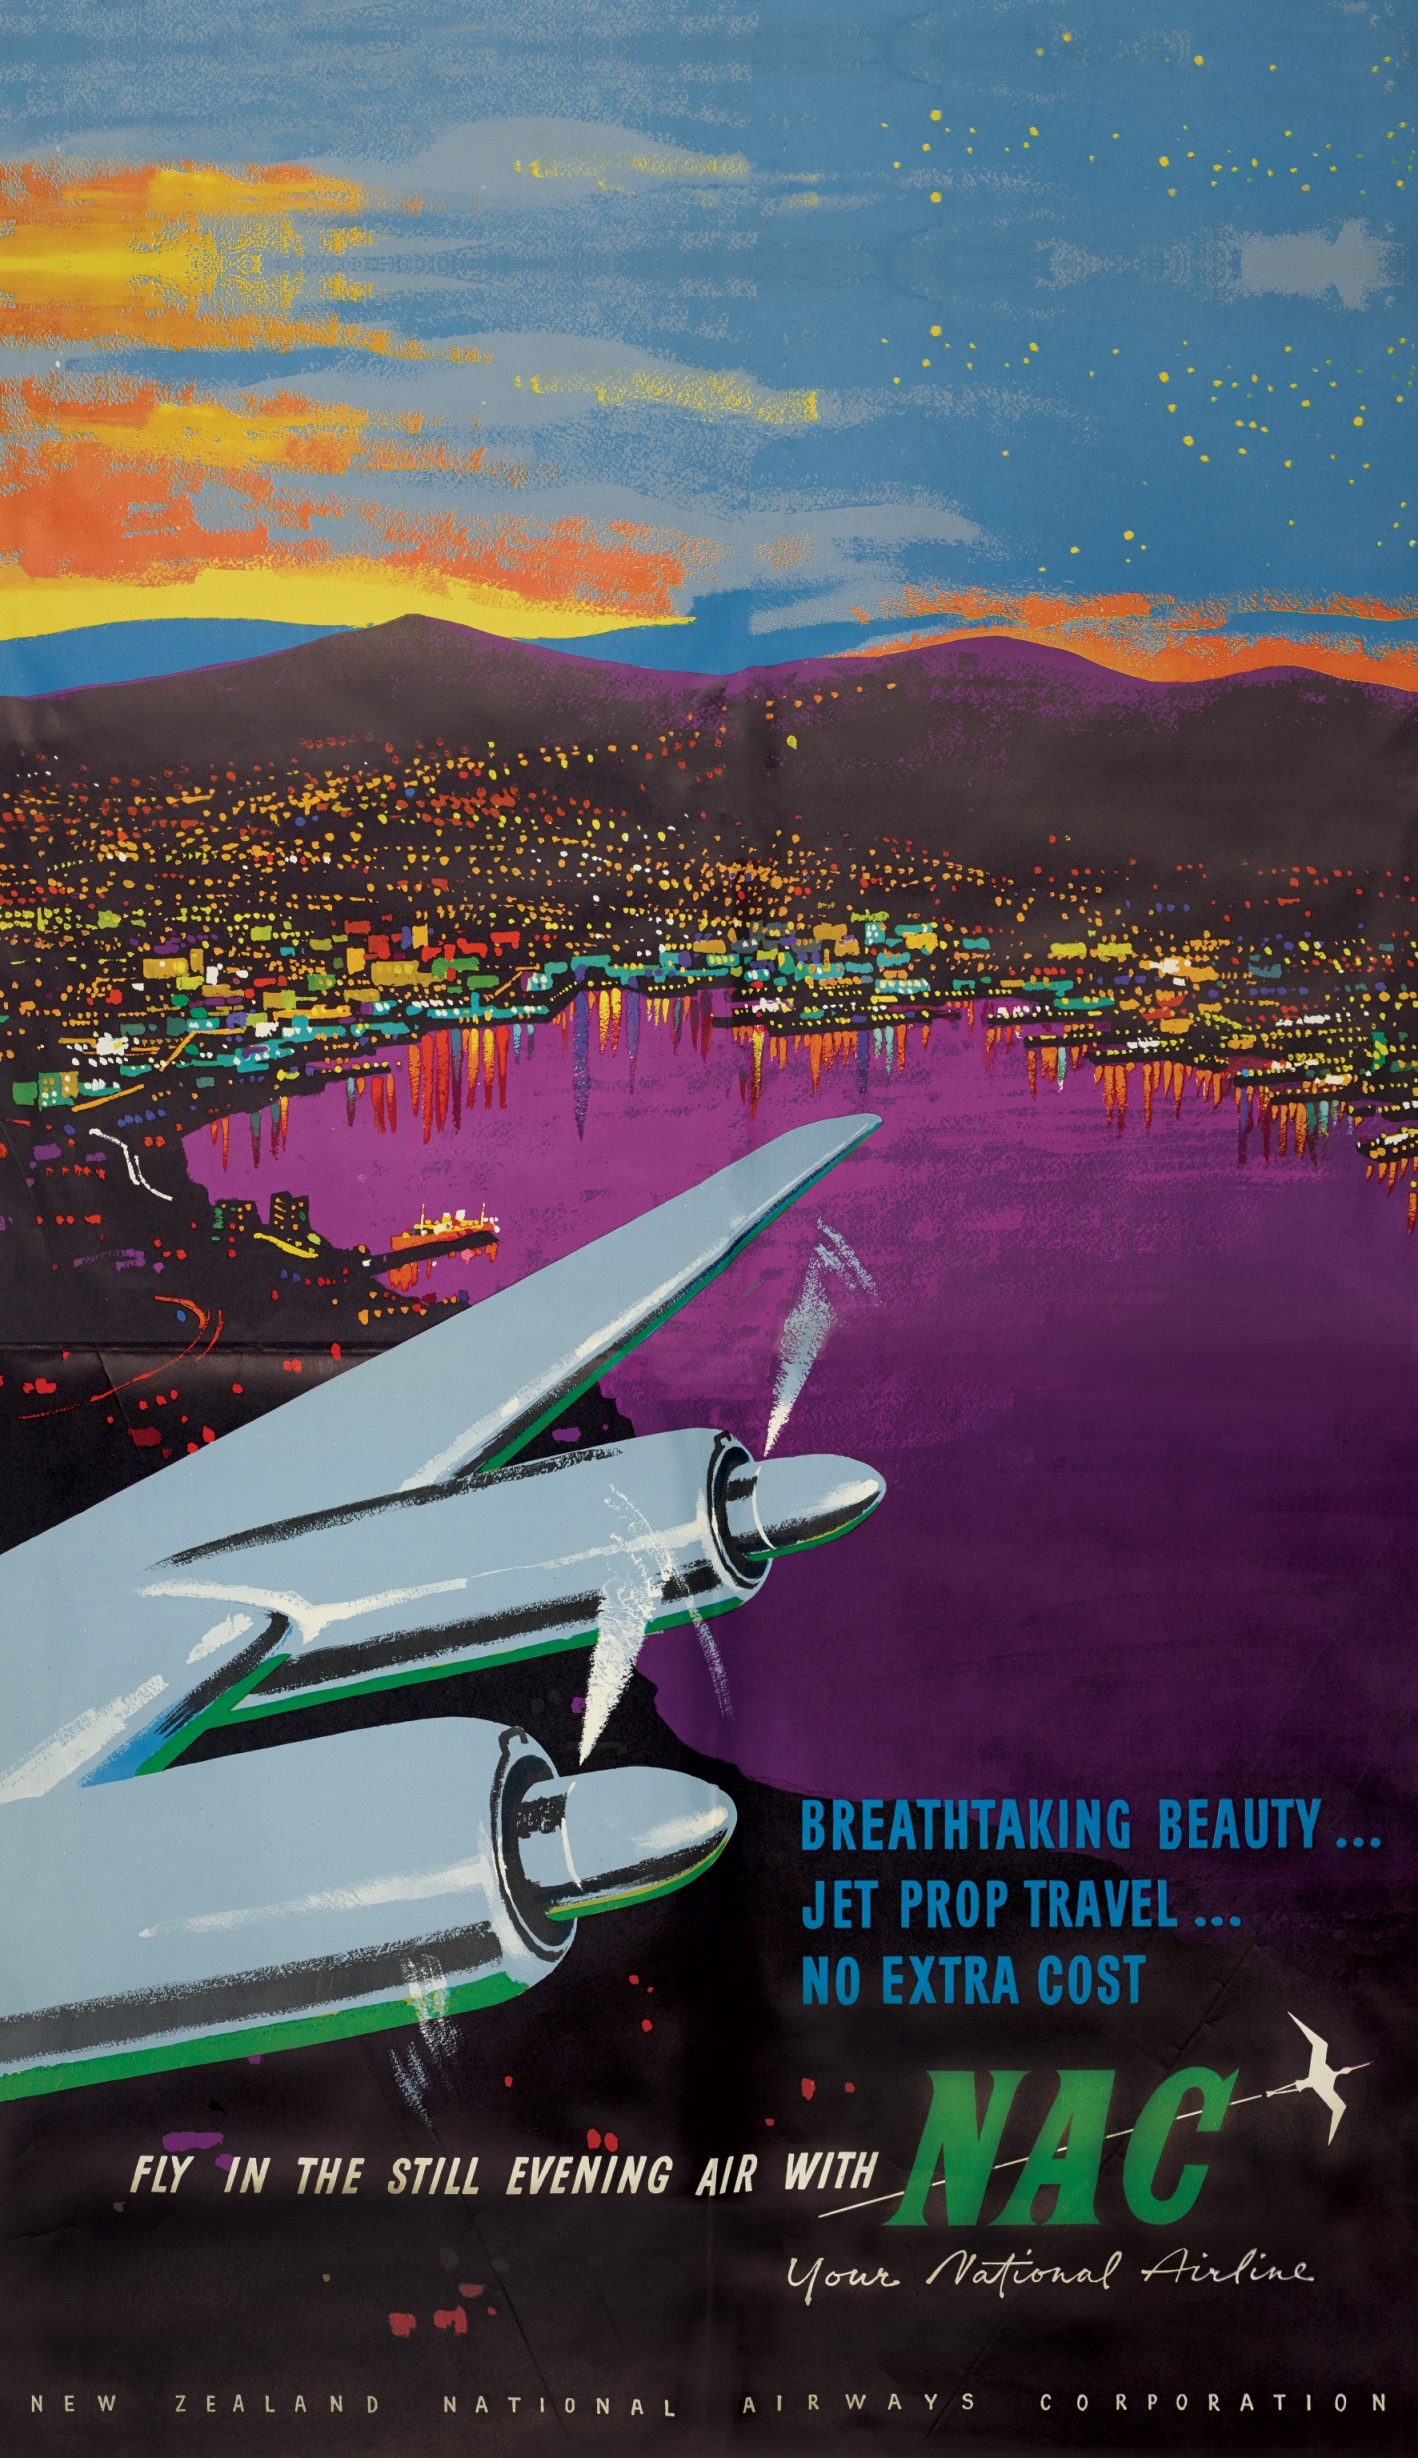 5 vintage airline posters to inspire you | Creative Bloq